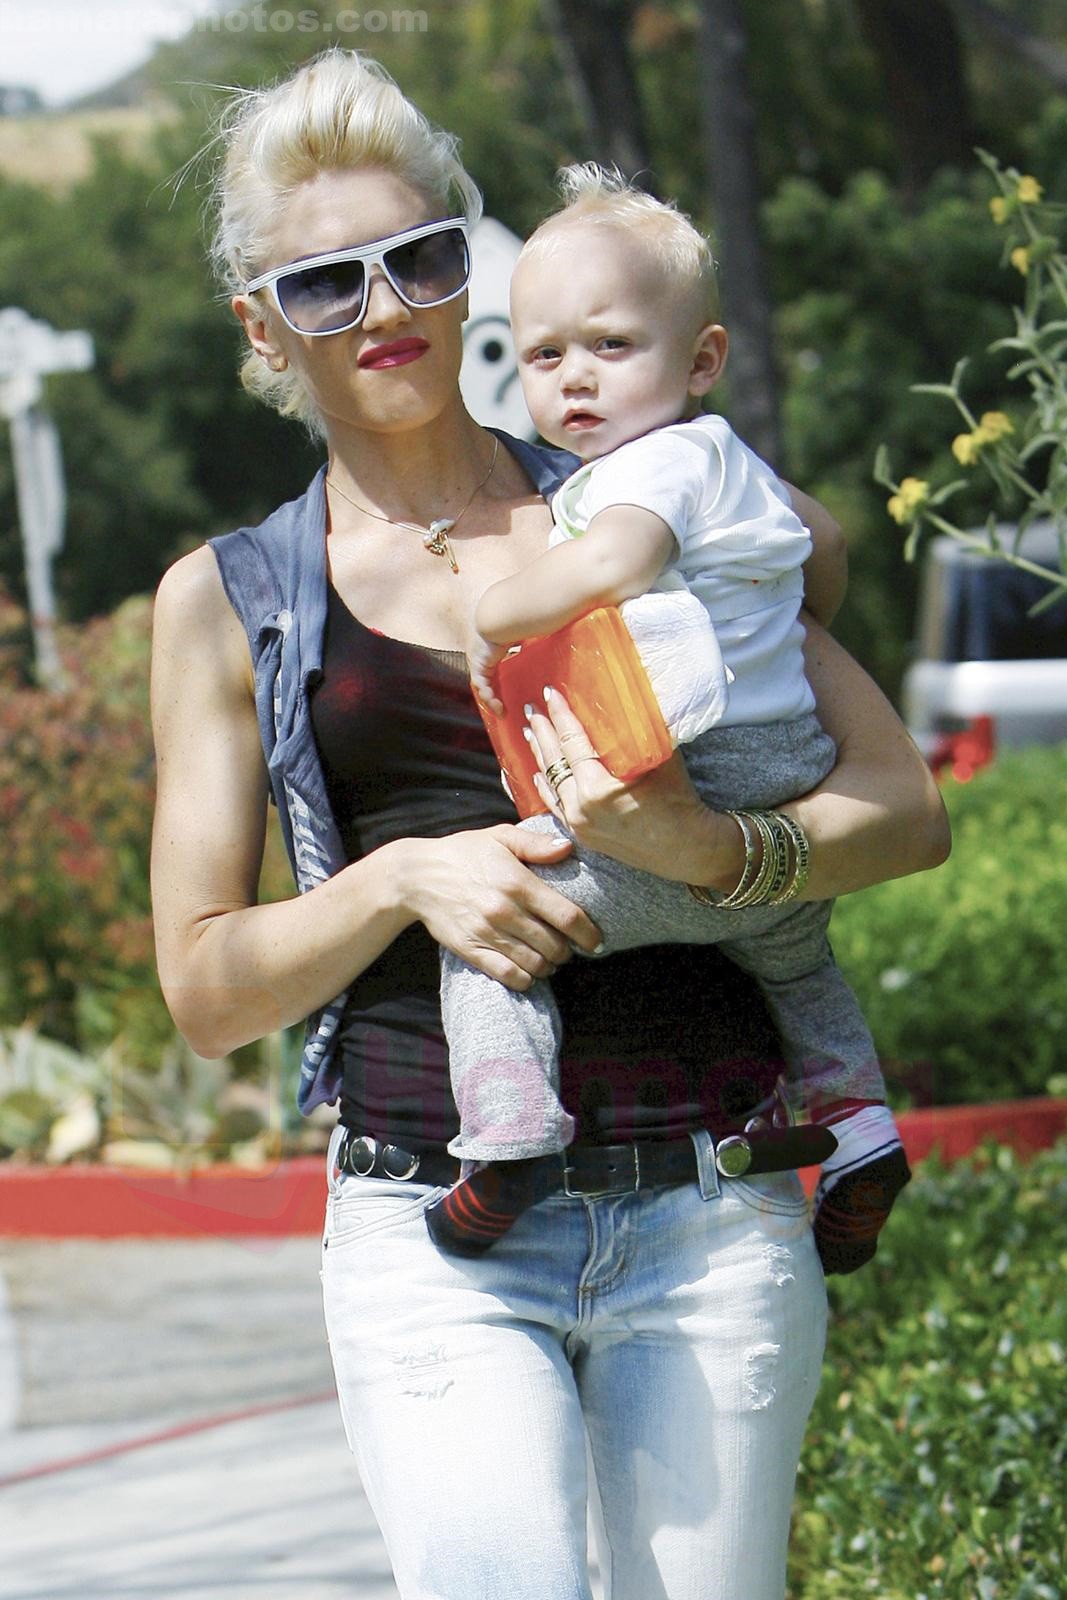 Gwen Stefani and her daughter Zuma goes shopping at Bristol Farms then stop by the park to change Zuma on 22-08-09 